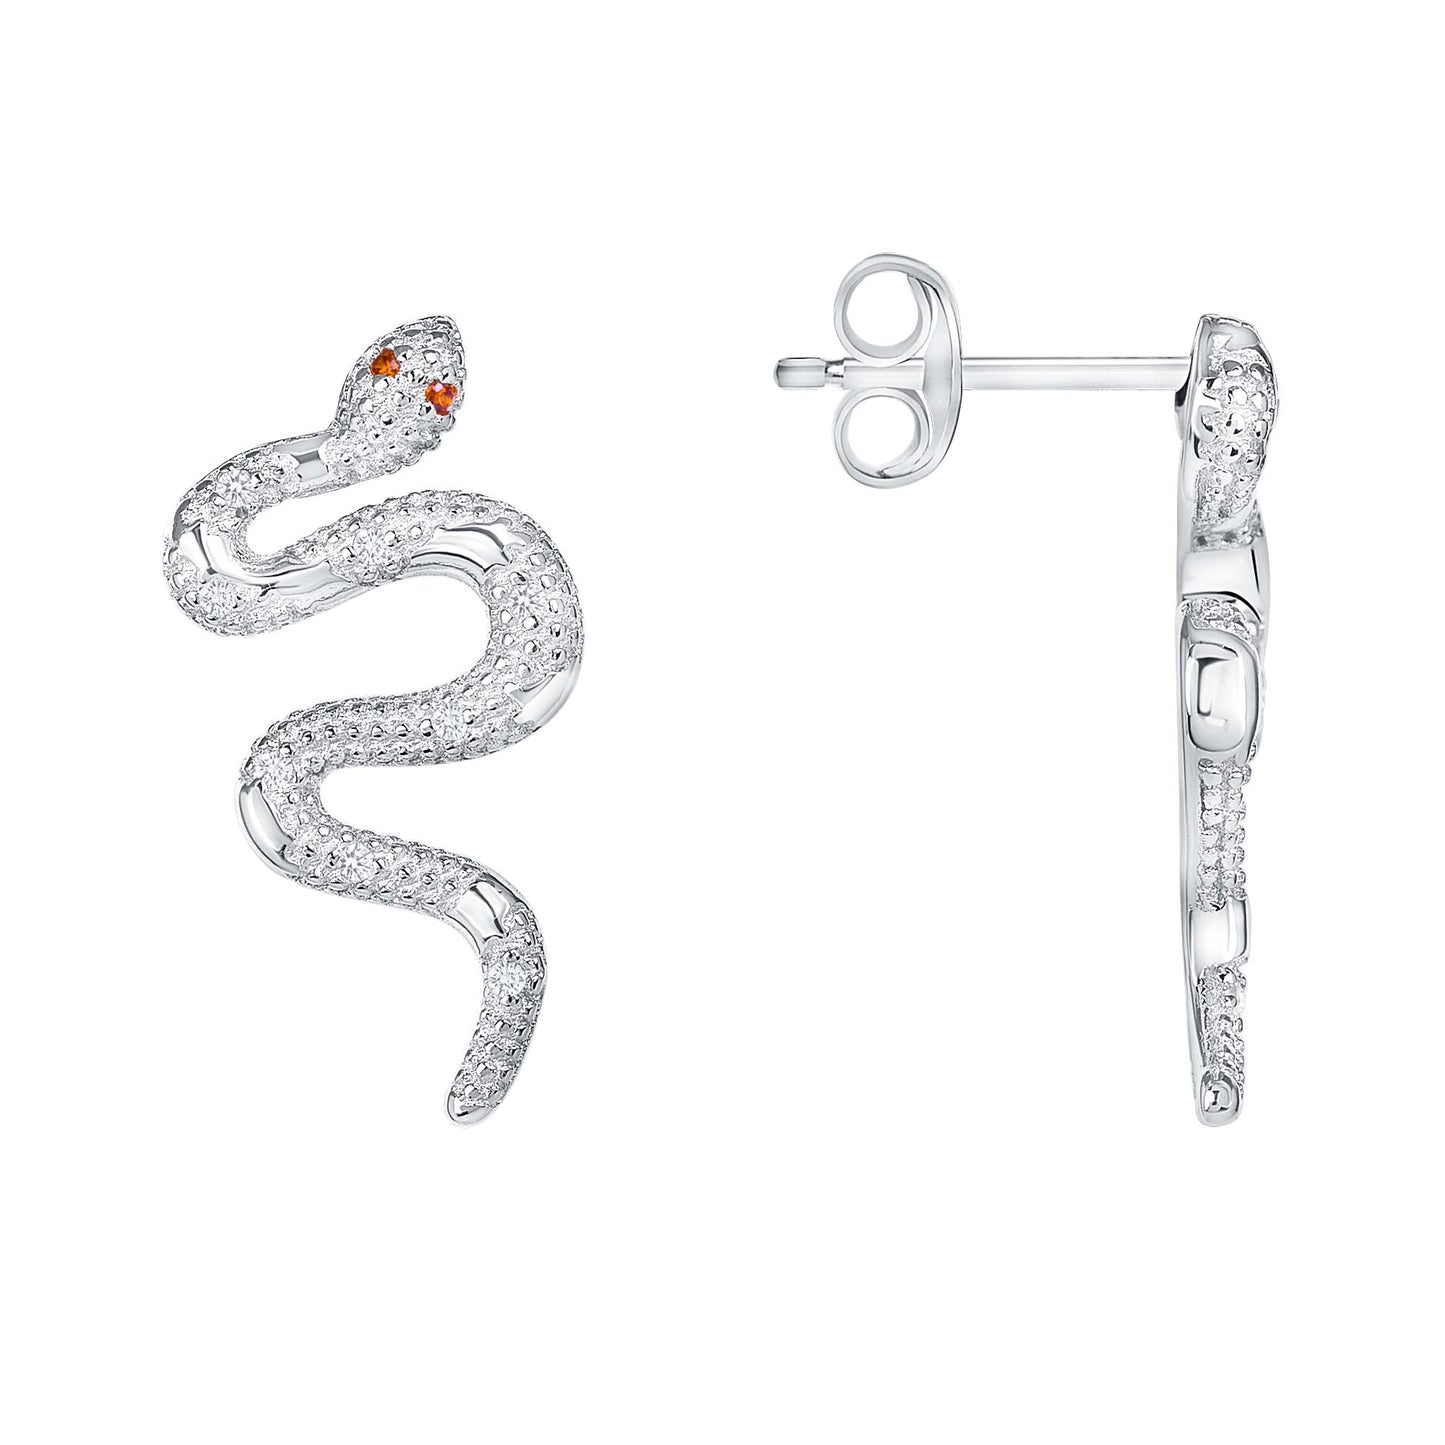 Silver 925 Rhodium Plated Cubic Zirconia Red Eye Snake Earring. DGE2242